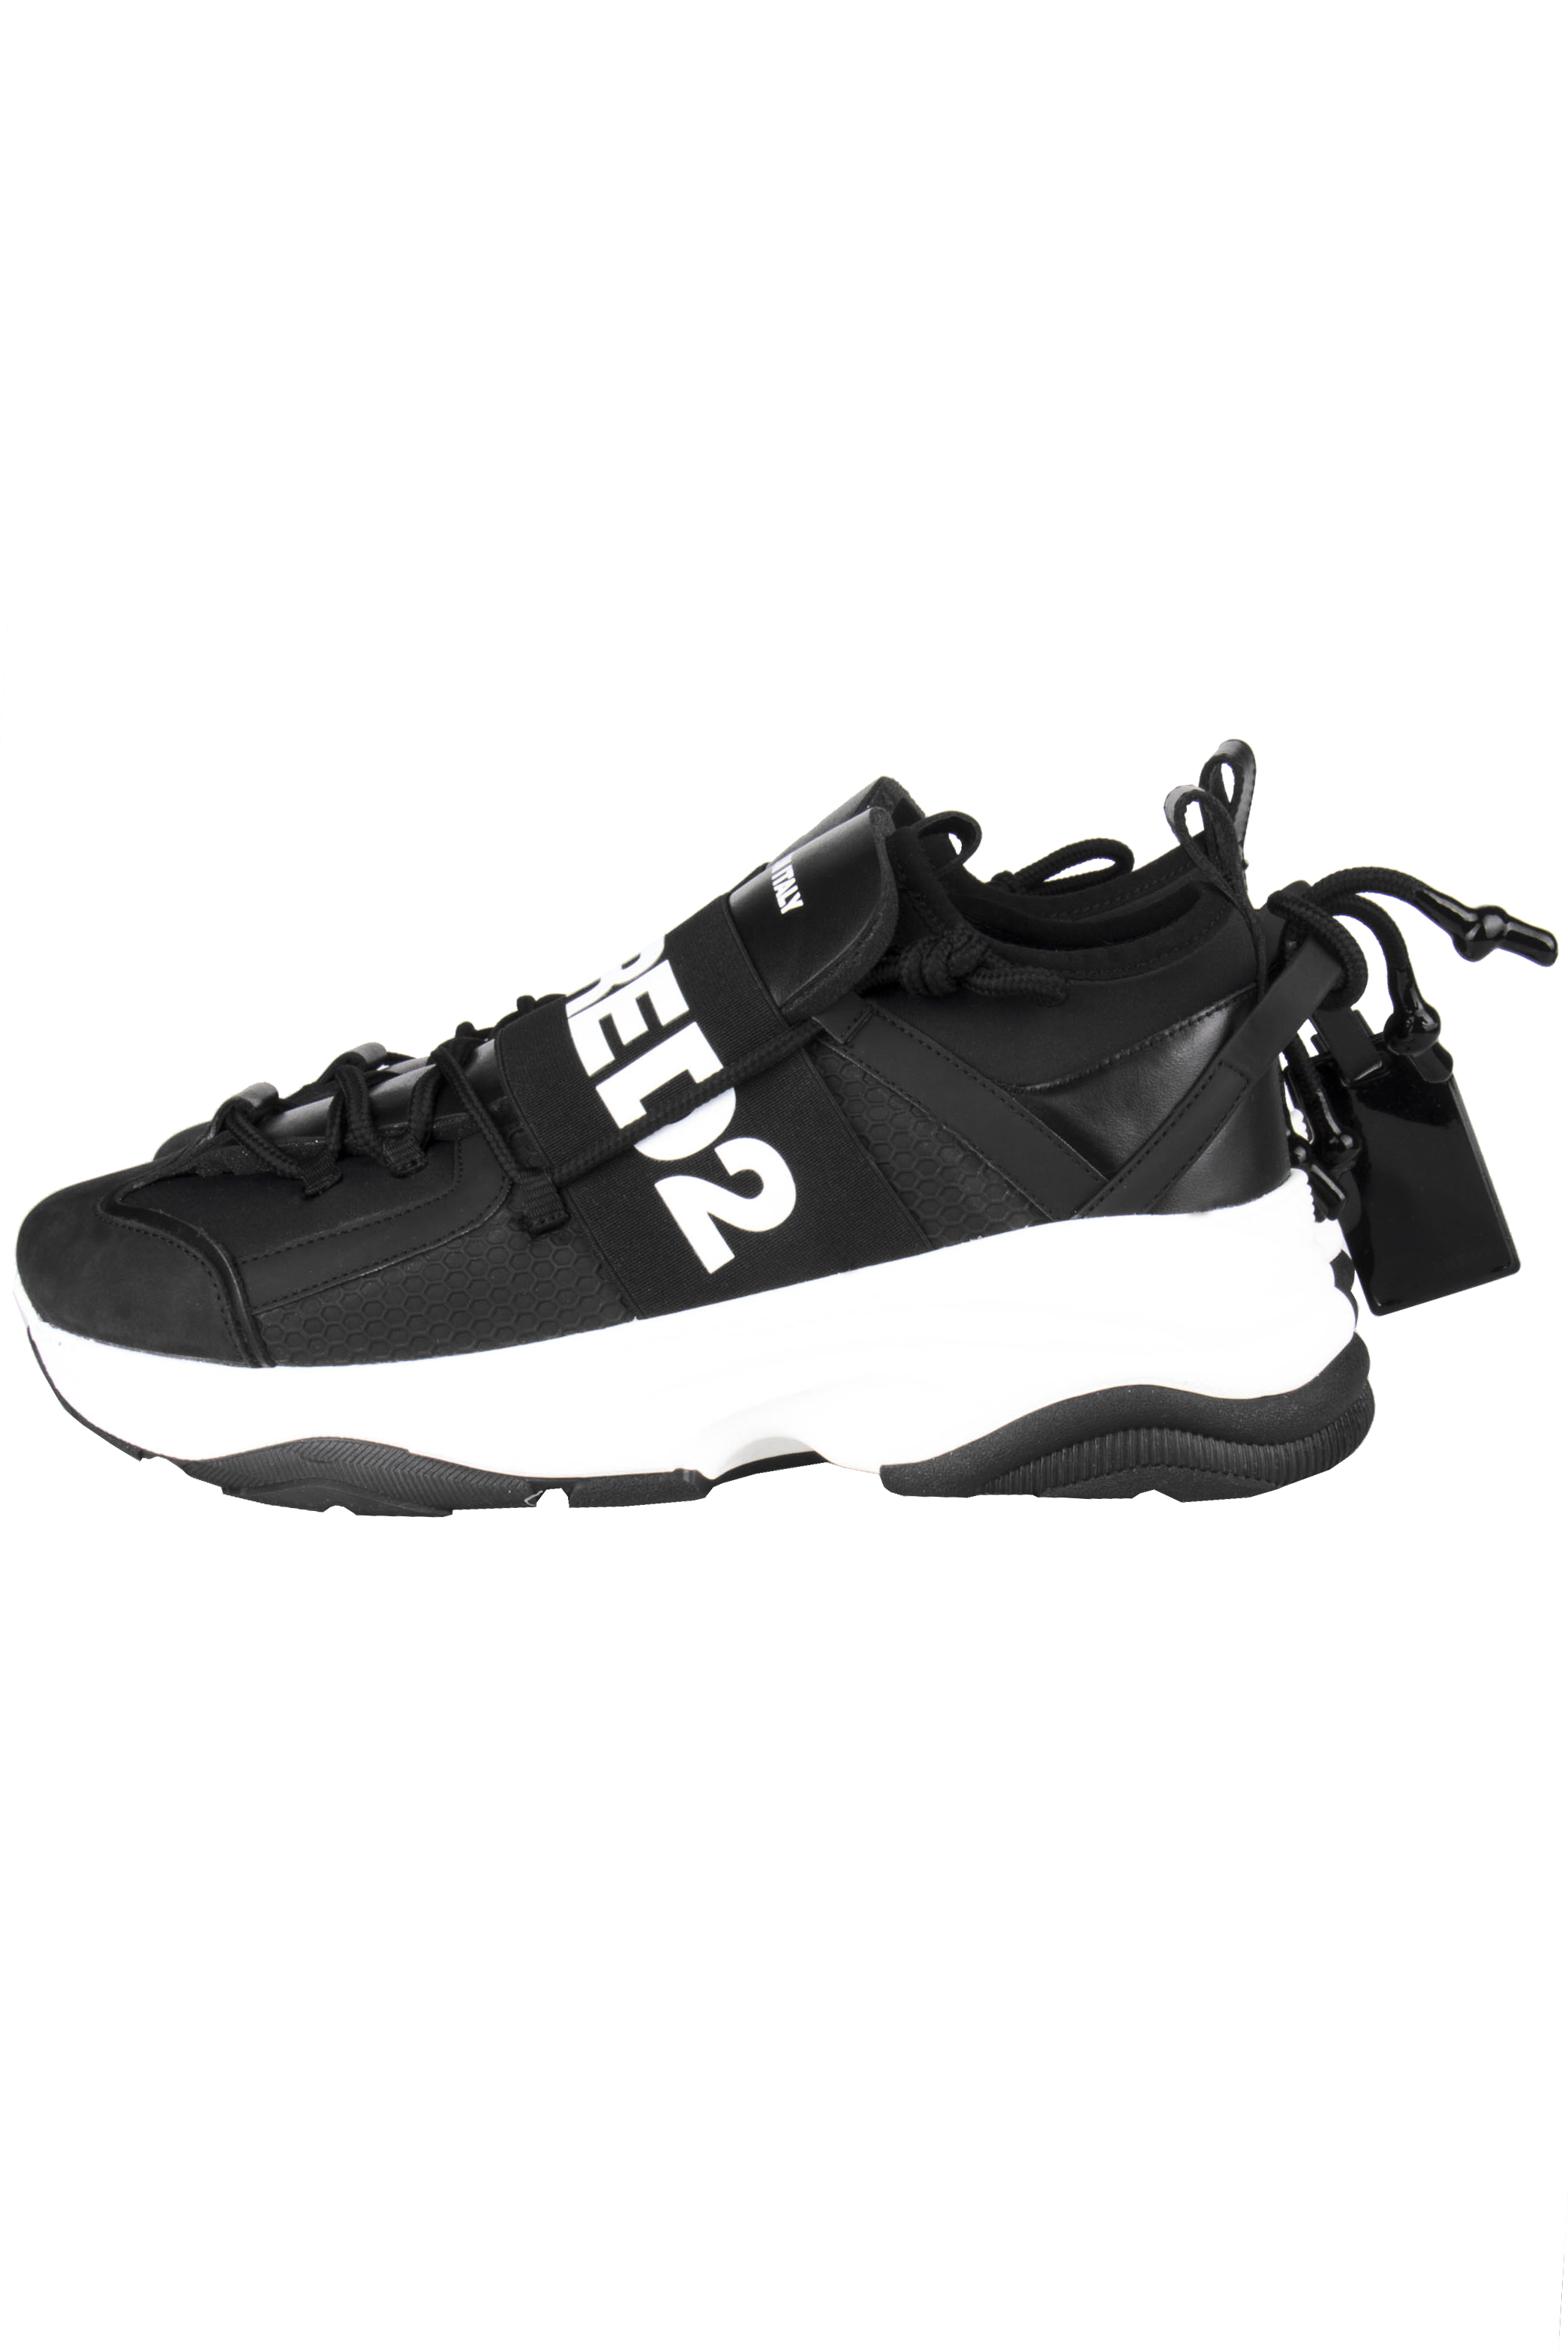 DSQUARED2 D-Bumpy One Sneakers 